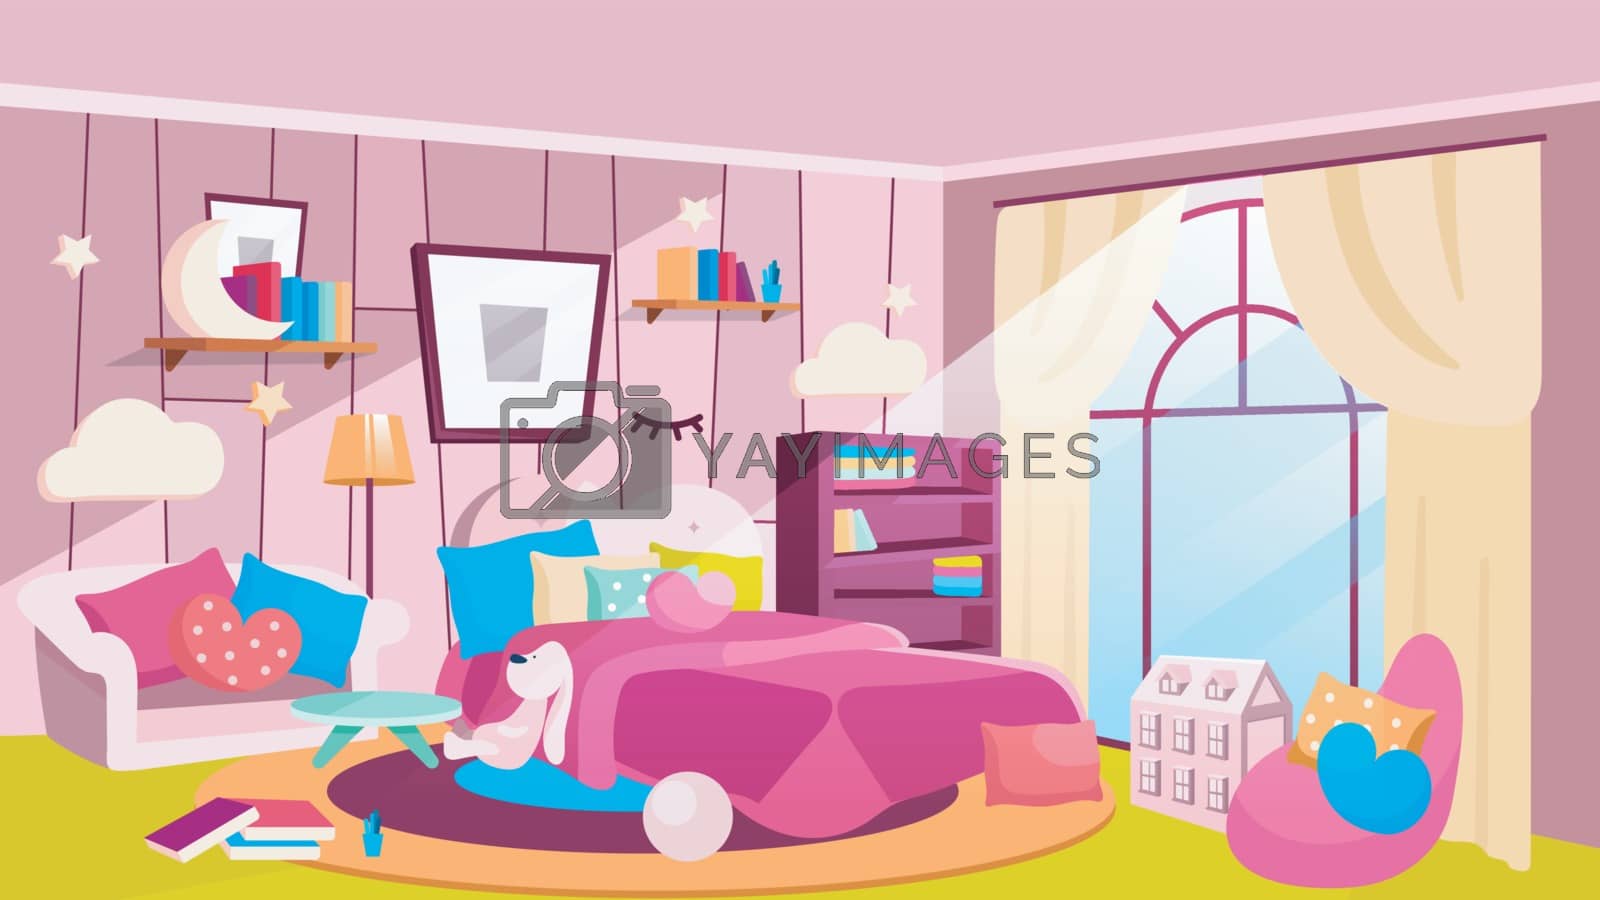 Royalty free image of Girls bedroom at daytime flat vector illustration. Spacious room with bed, bookshelves, picture on wall. Girlish house interior with pink sofa, armchair, blanket. Decorative cloud-shaped lamps by ntl